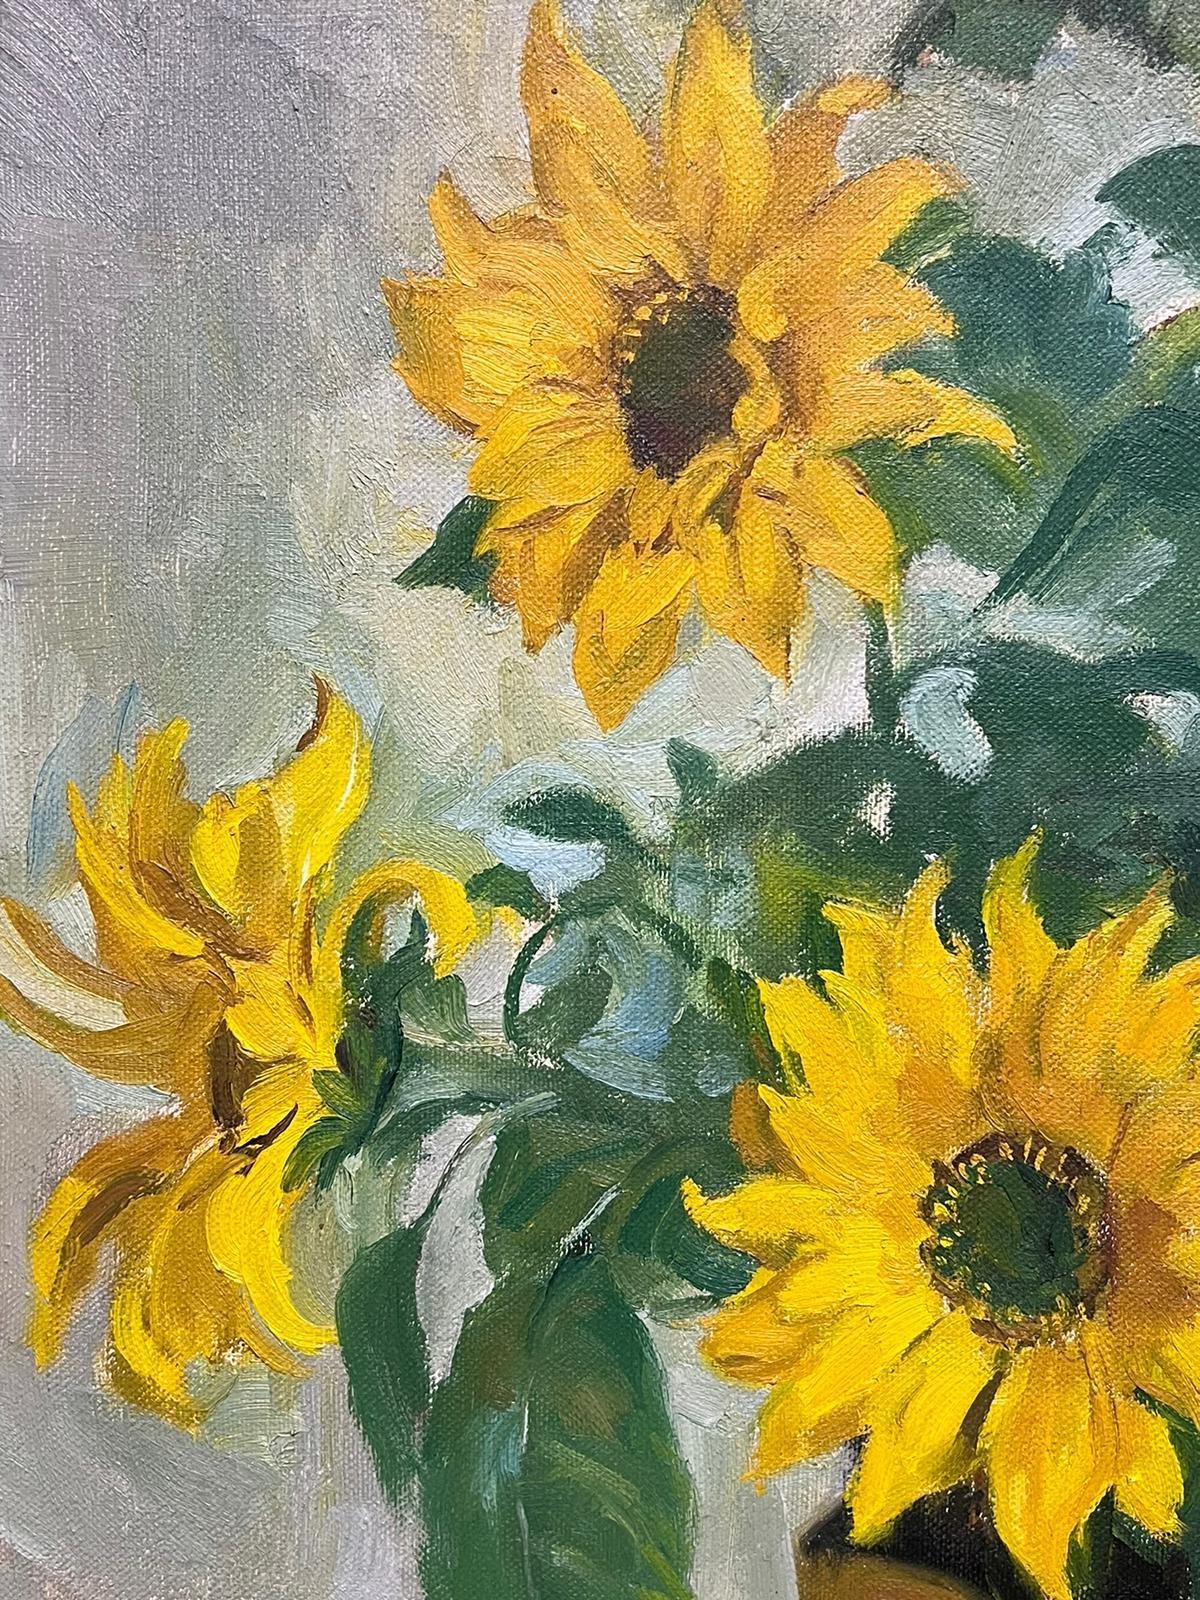 Sunflowers in Vase 1950's English Impressionist Signed Oil Painting on Canvas For Sale 2